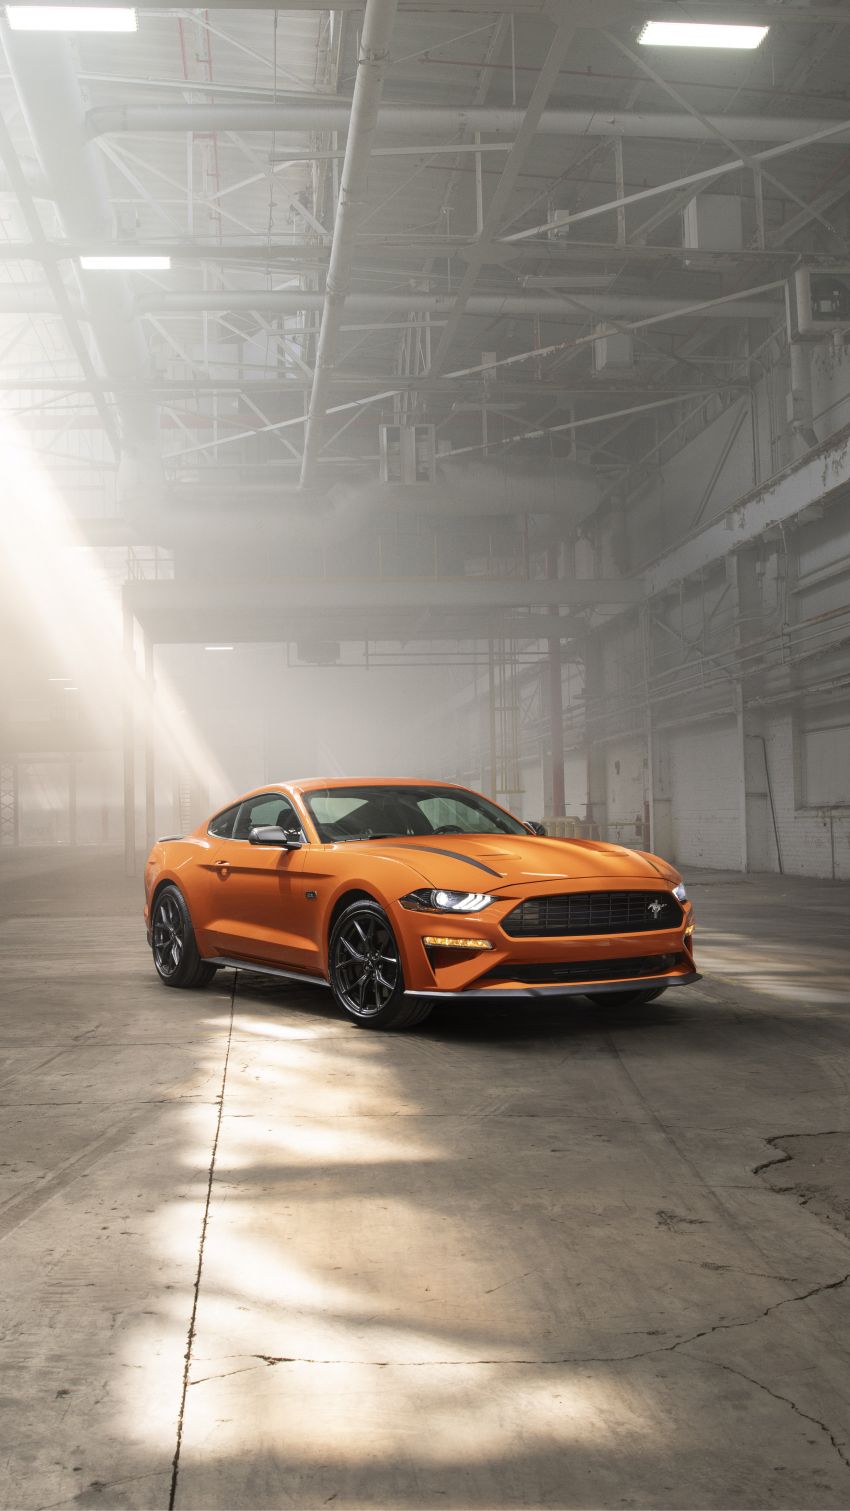 2020 Ford Mustang 2.3L gets Performance Package Image #965300